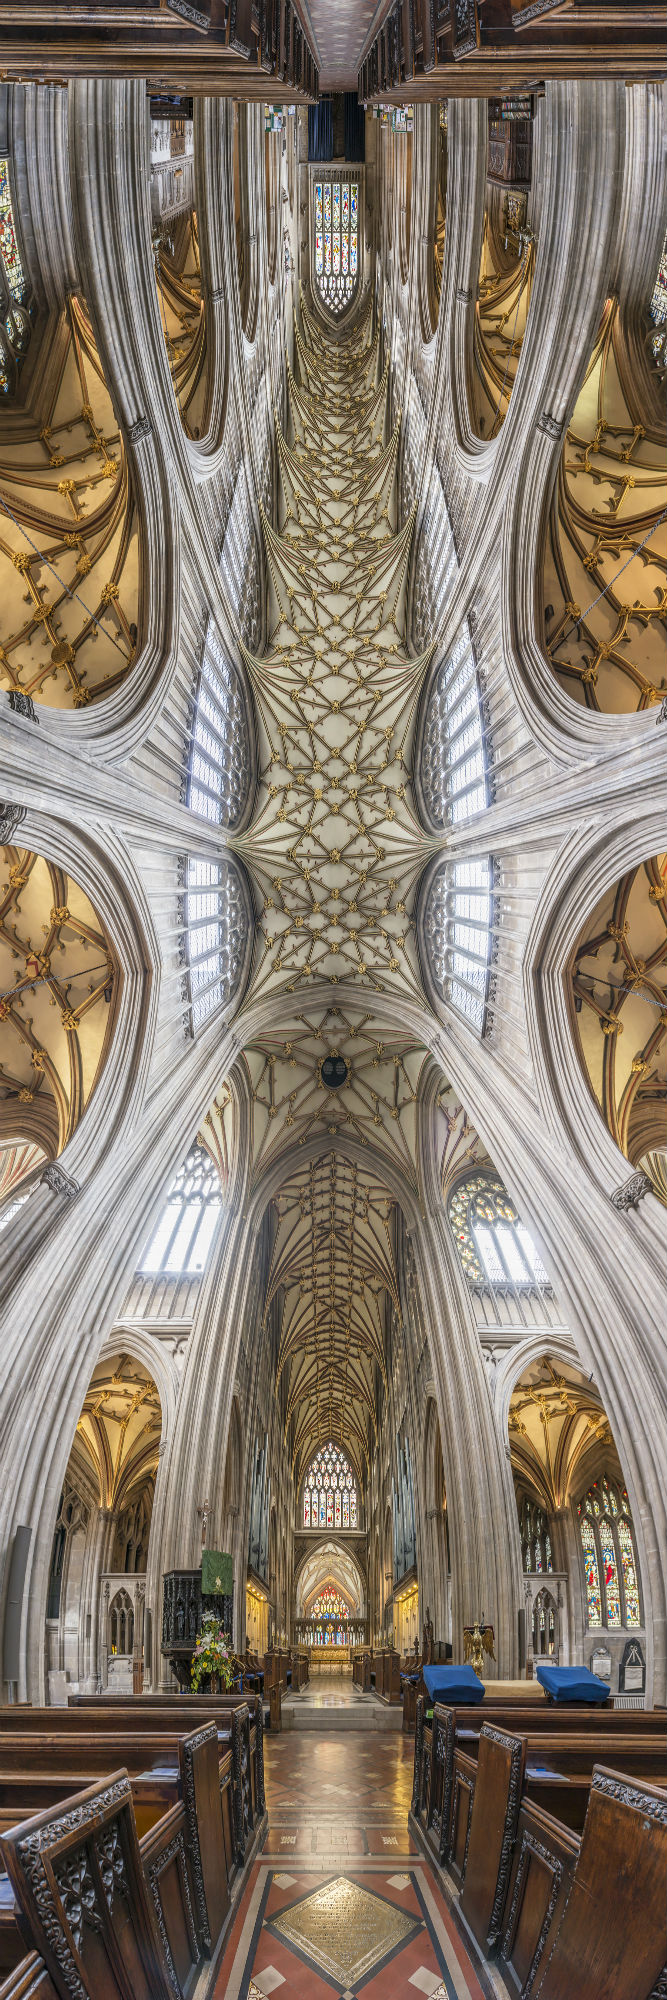 St. Mary's Redcliffe - Bristol, England / Richard Silver